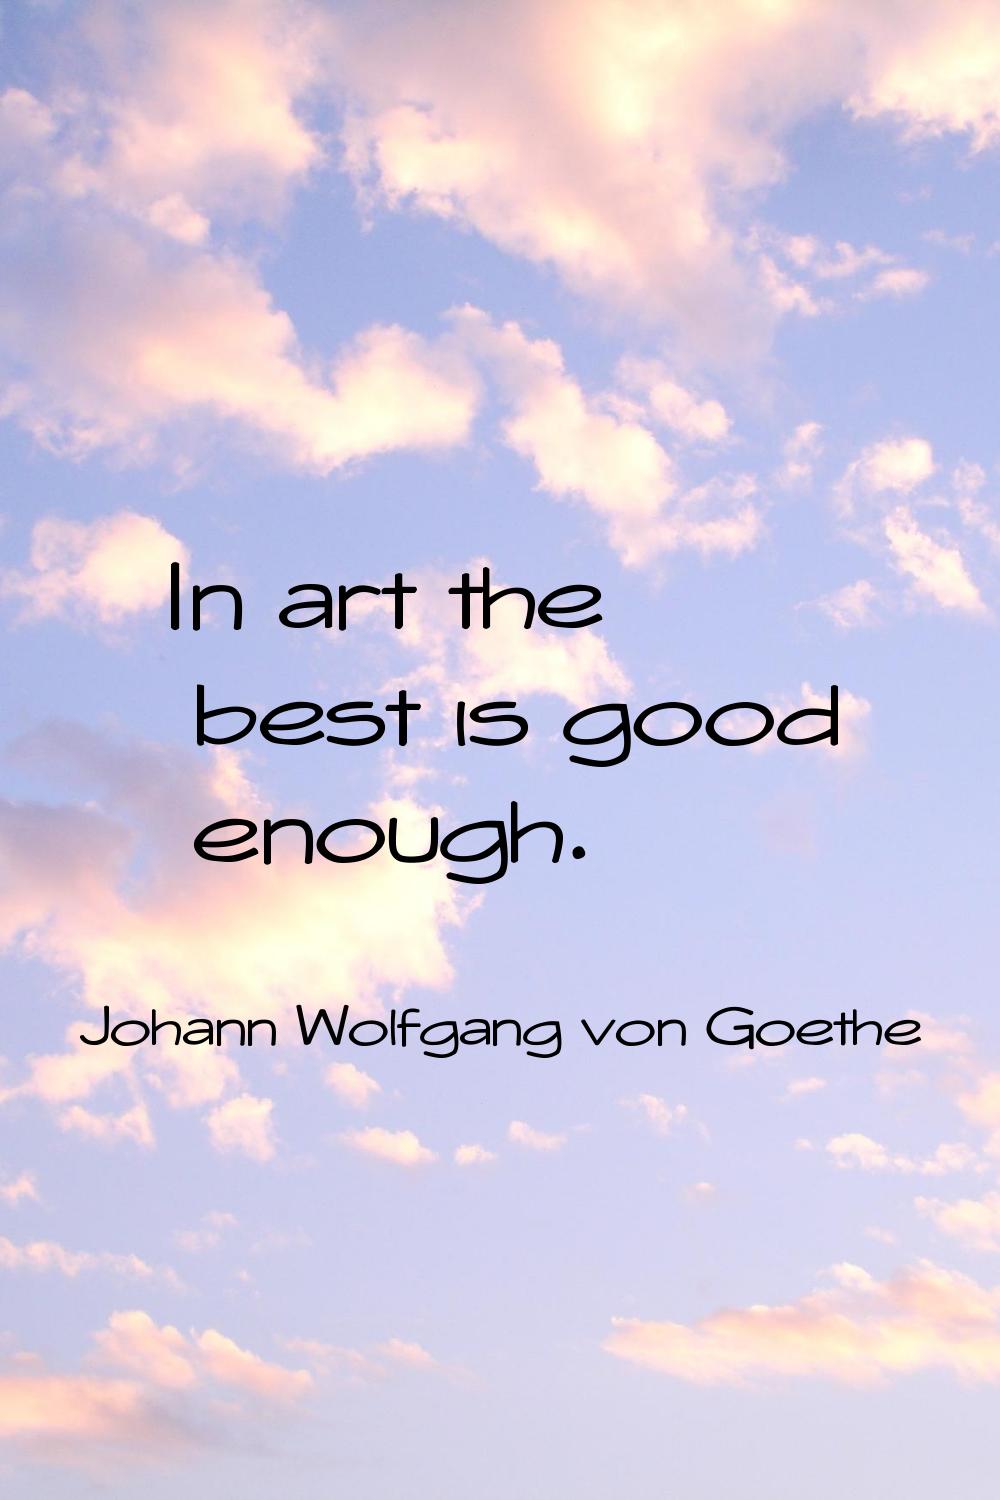 In art the best is good enough.